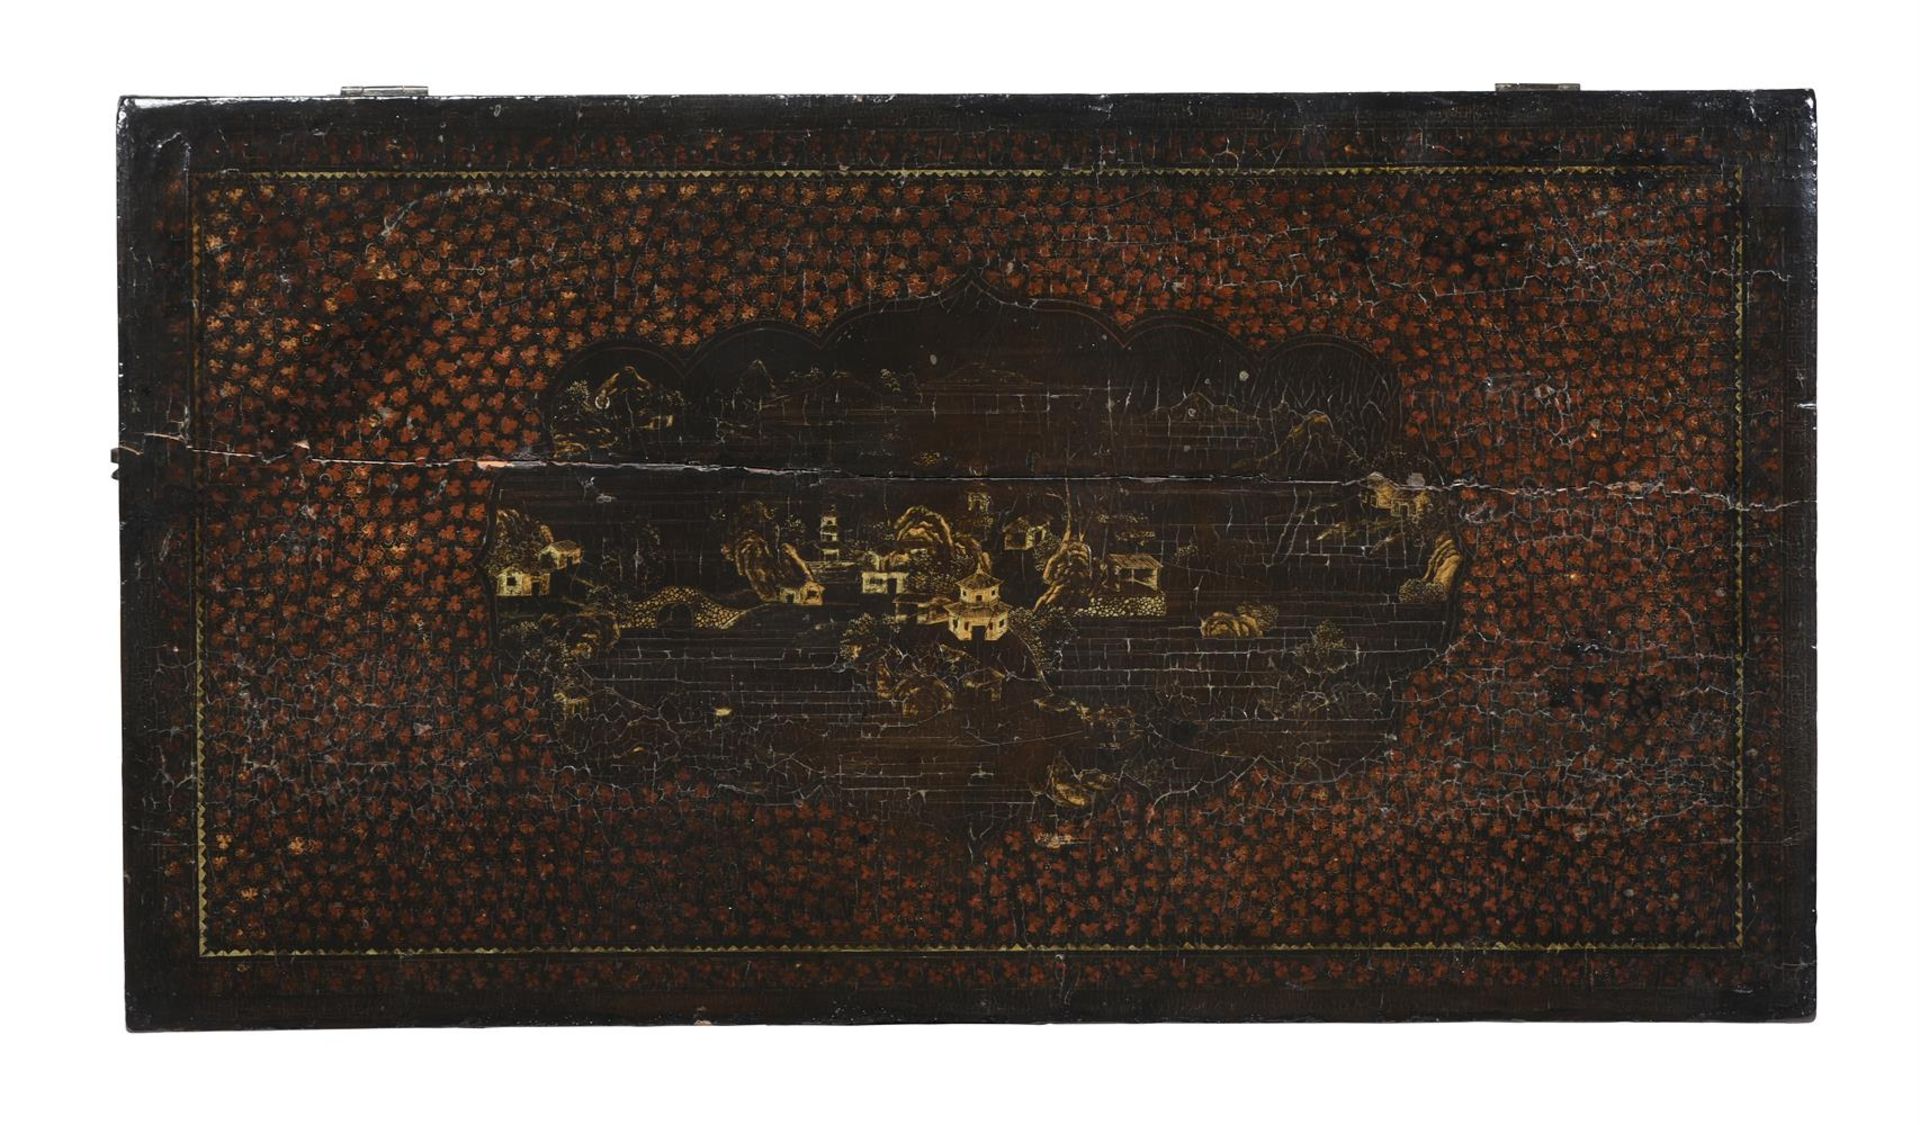 A CHINESE EXPORT BLACK LACQUER AND GILT DECORATED CHEST, LATE 18TH OR EARLY 19TH CENTURY - Bild 2 aus 4